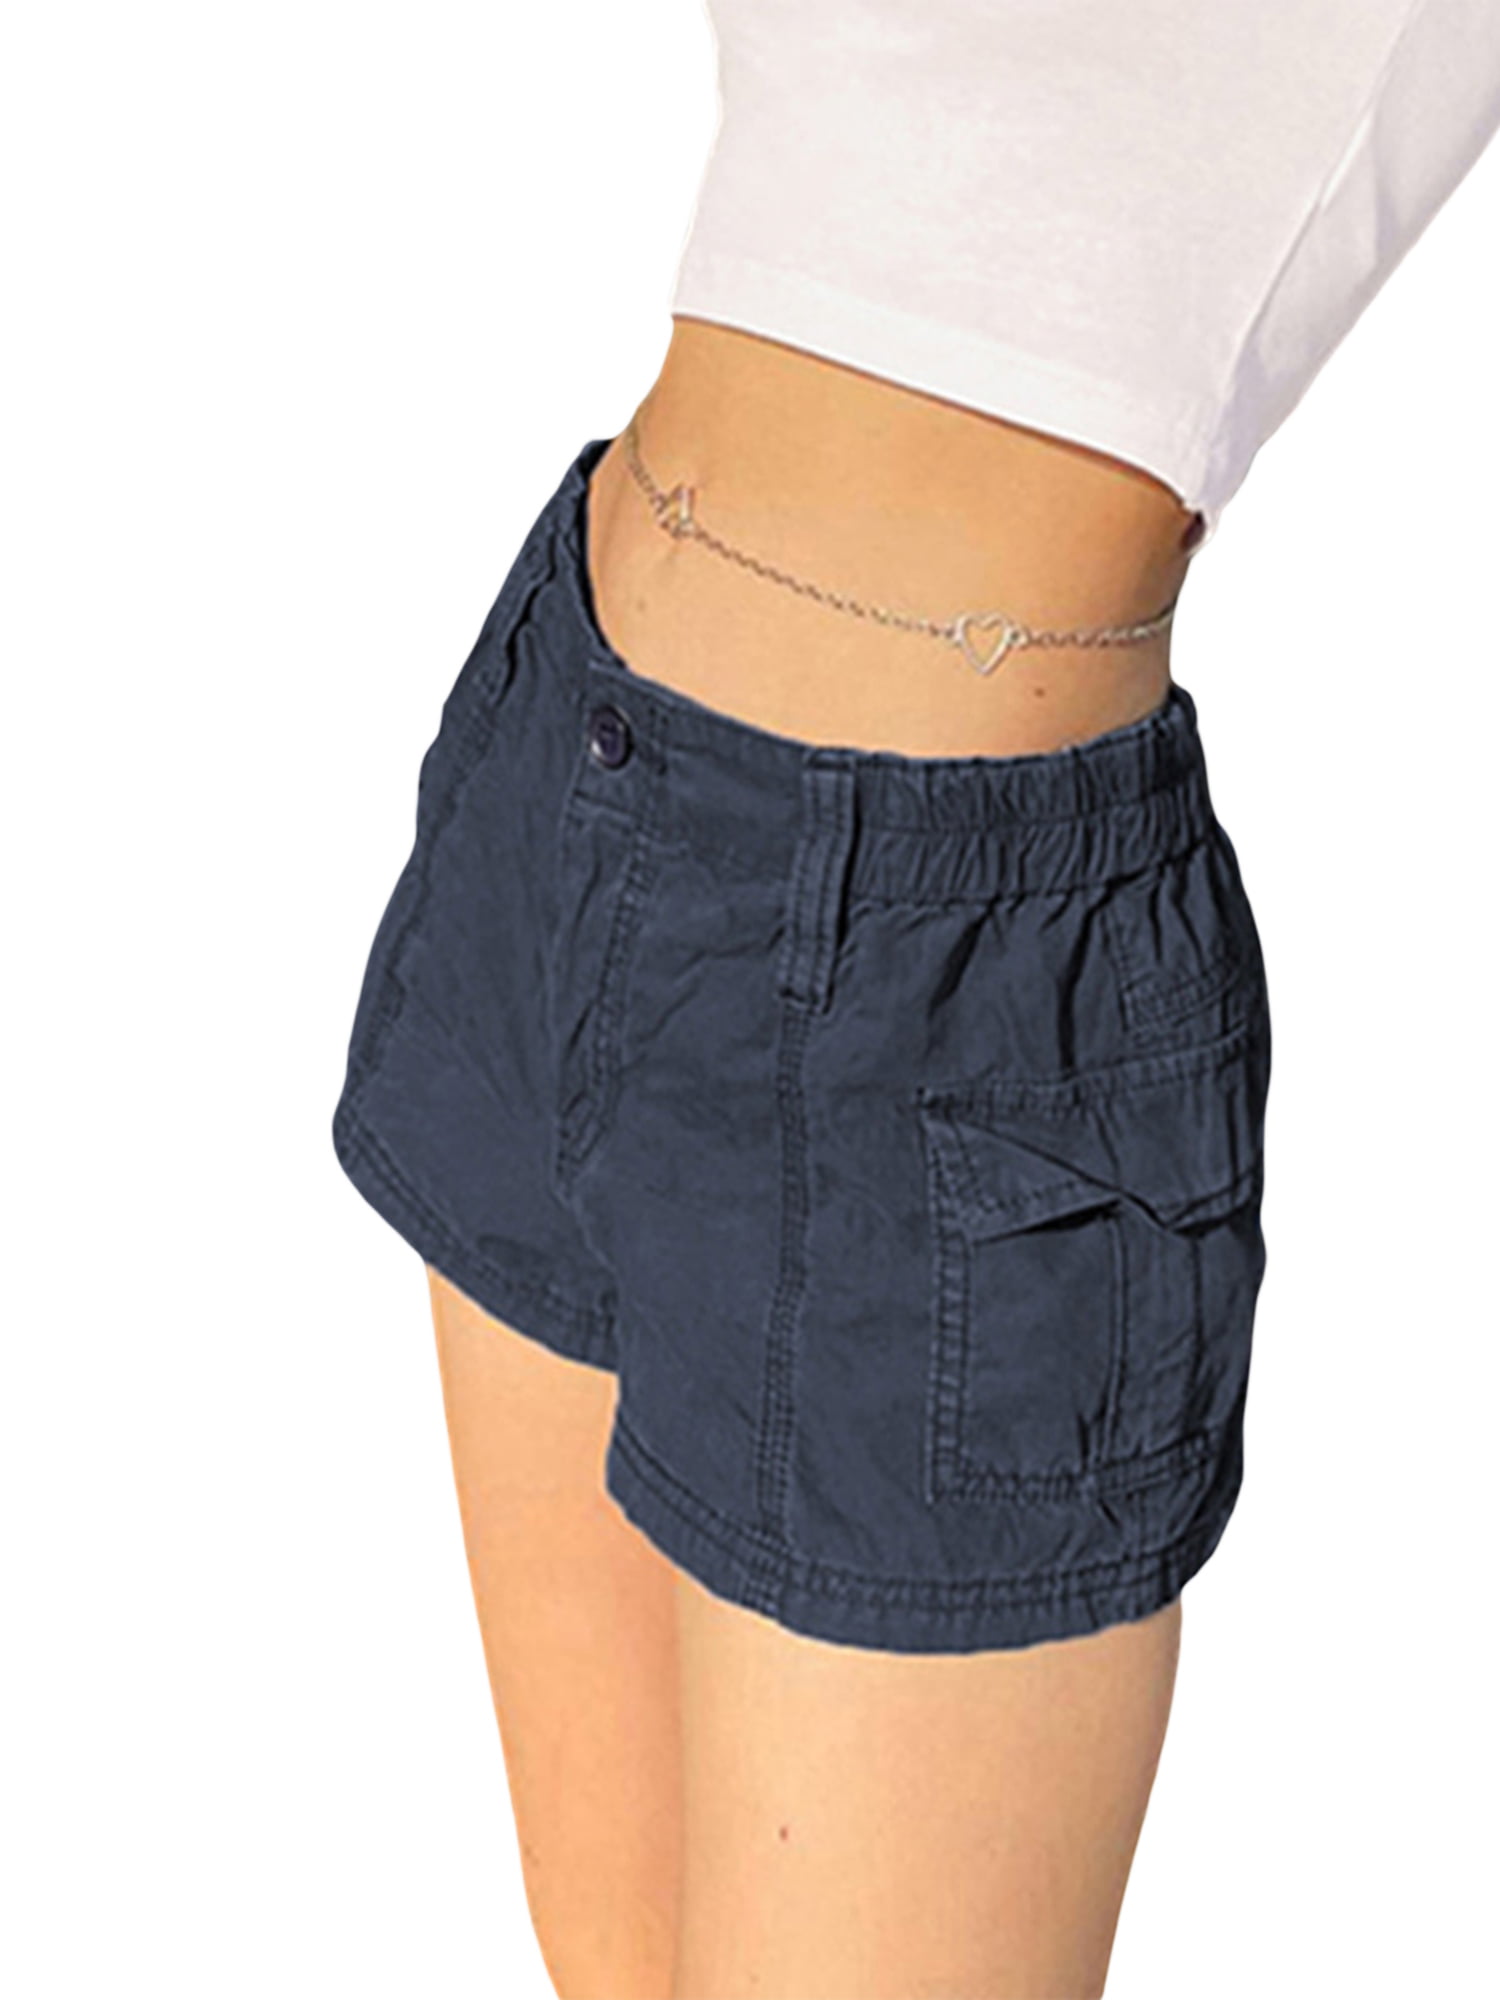 Cargo Shorts for Women Fashion Ruffle Elastic Waist Lace Up Mini Short  Pants Casual Summer Slim Fit Straight Hot Pant at  Women's Clothing  store